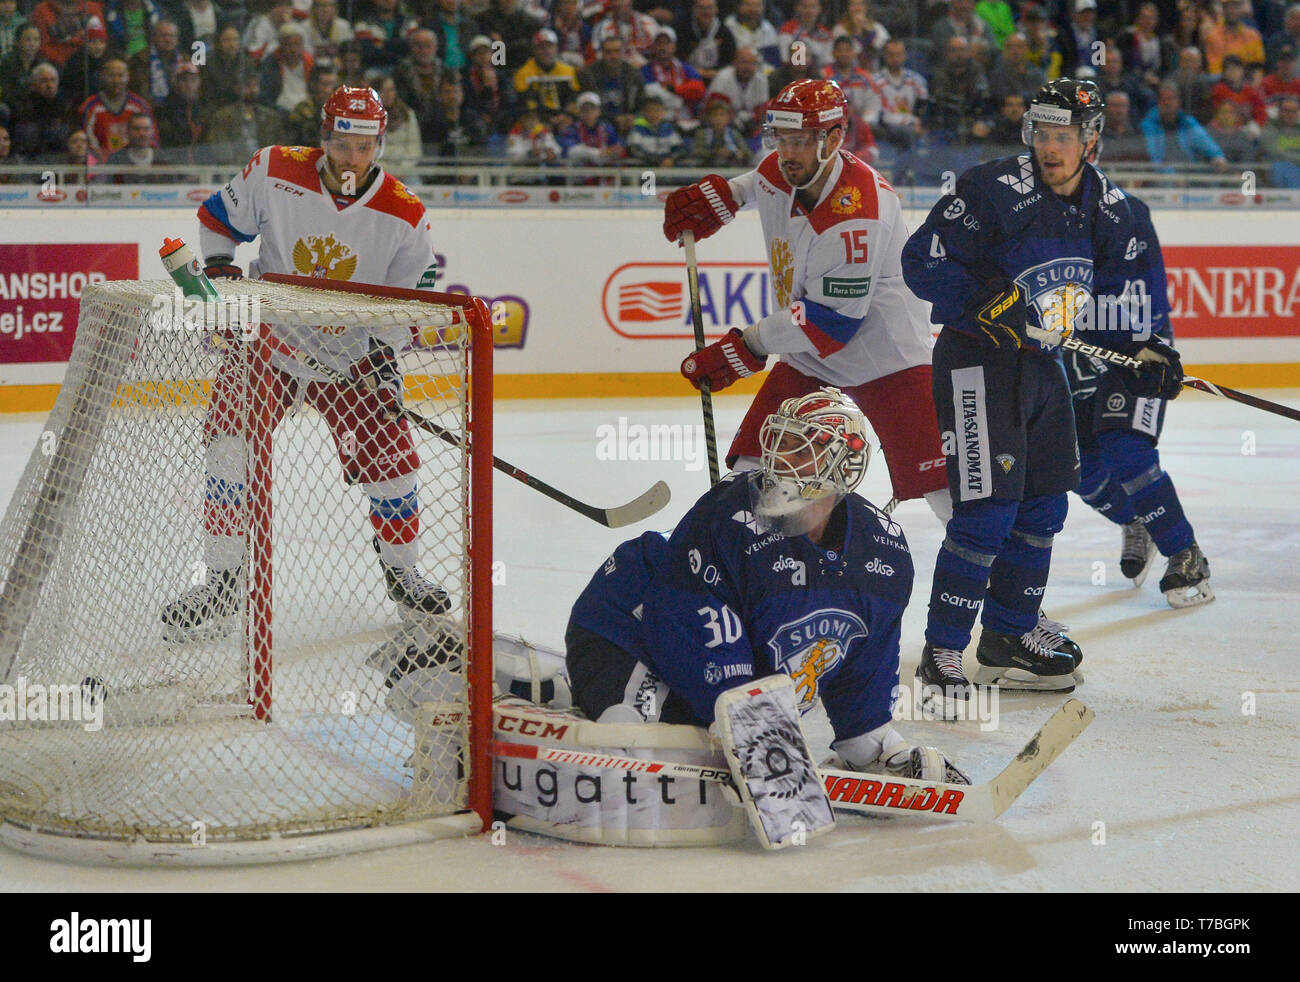 Brno, Czech Republic. 04th May, 2019. L-R Mikhail Grigorenko (RUS), goalkeeper Kevin Lankinen (FIN), Artyom Anisimov (RUS) and Mikko Lehtonen (FIN) in action during the Russia vs Finland match within Carlson Hockey Games tournament, part of Euro Hockey Tour in Brno, Czech Republic, May 4, 2019. Credit: Lubos Pavlicek/CTK Photo/Alamy Live News Stock Photo